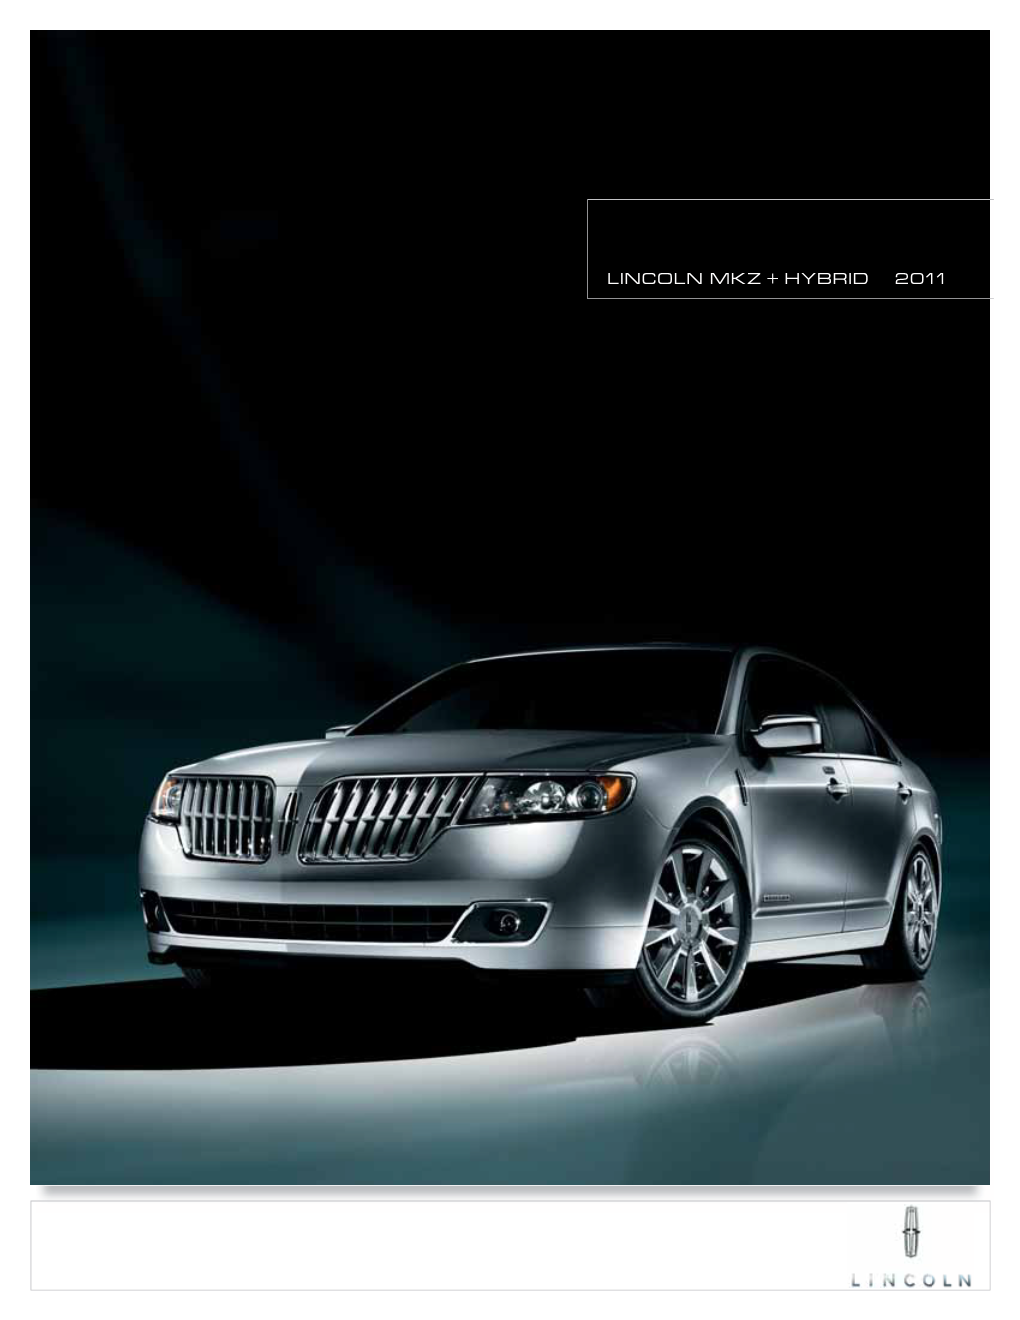 Lincoln Mkz + Hybrid 2011 the Most Fuel-Efficient Luxury Car in America.1